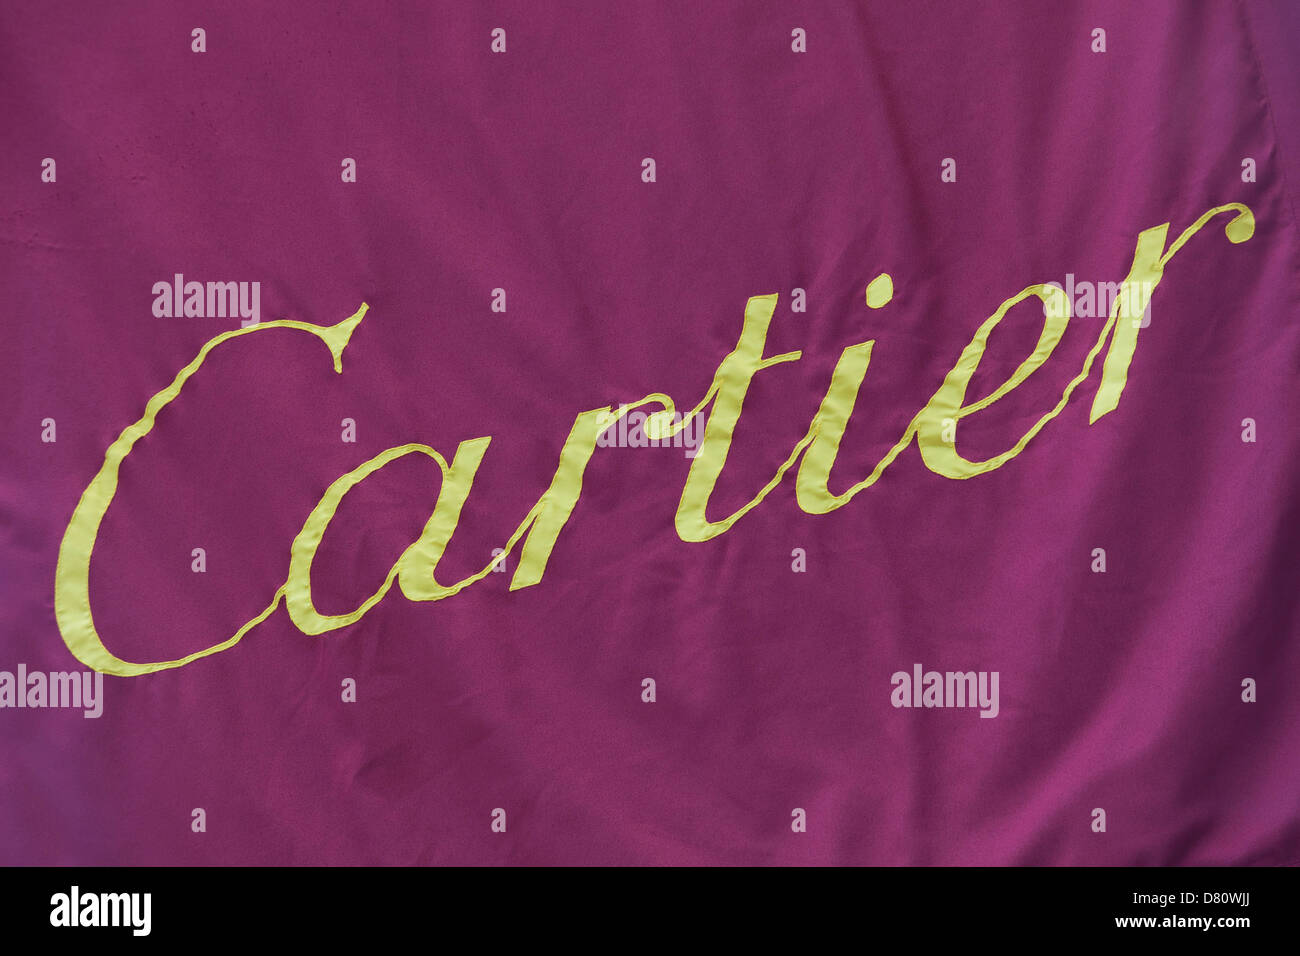 cartier clothing